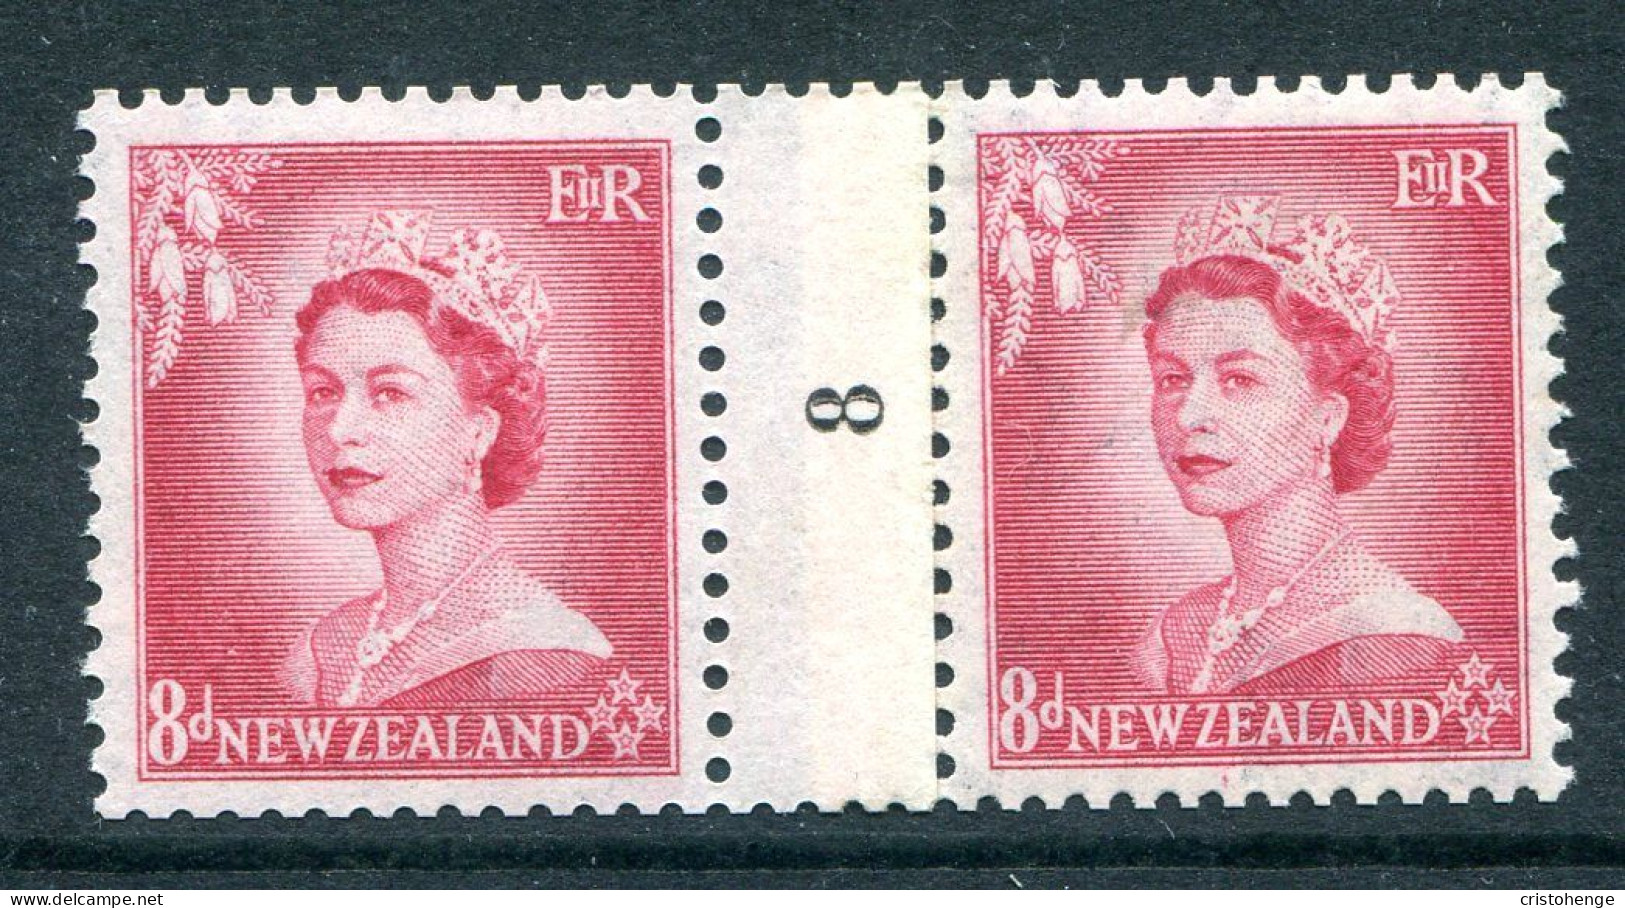 New Zealand 1953-59 QEII Definitives - Coil Pairs - 8d Rose-carmine - No. 8 - LHM (SG Unlisted) - Neufs